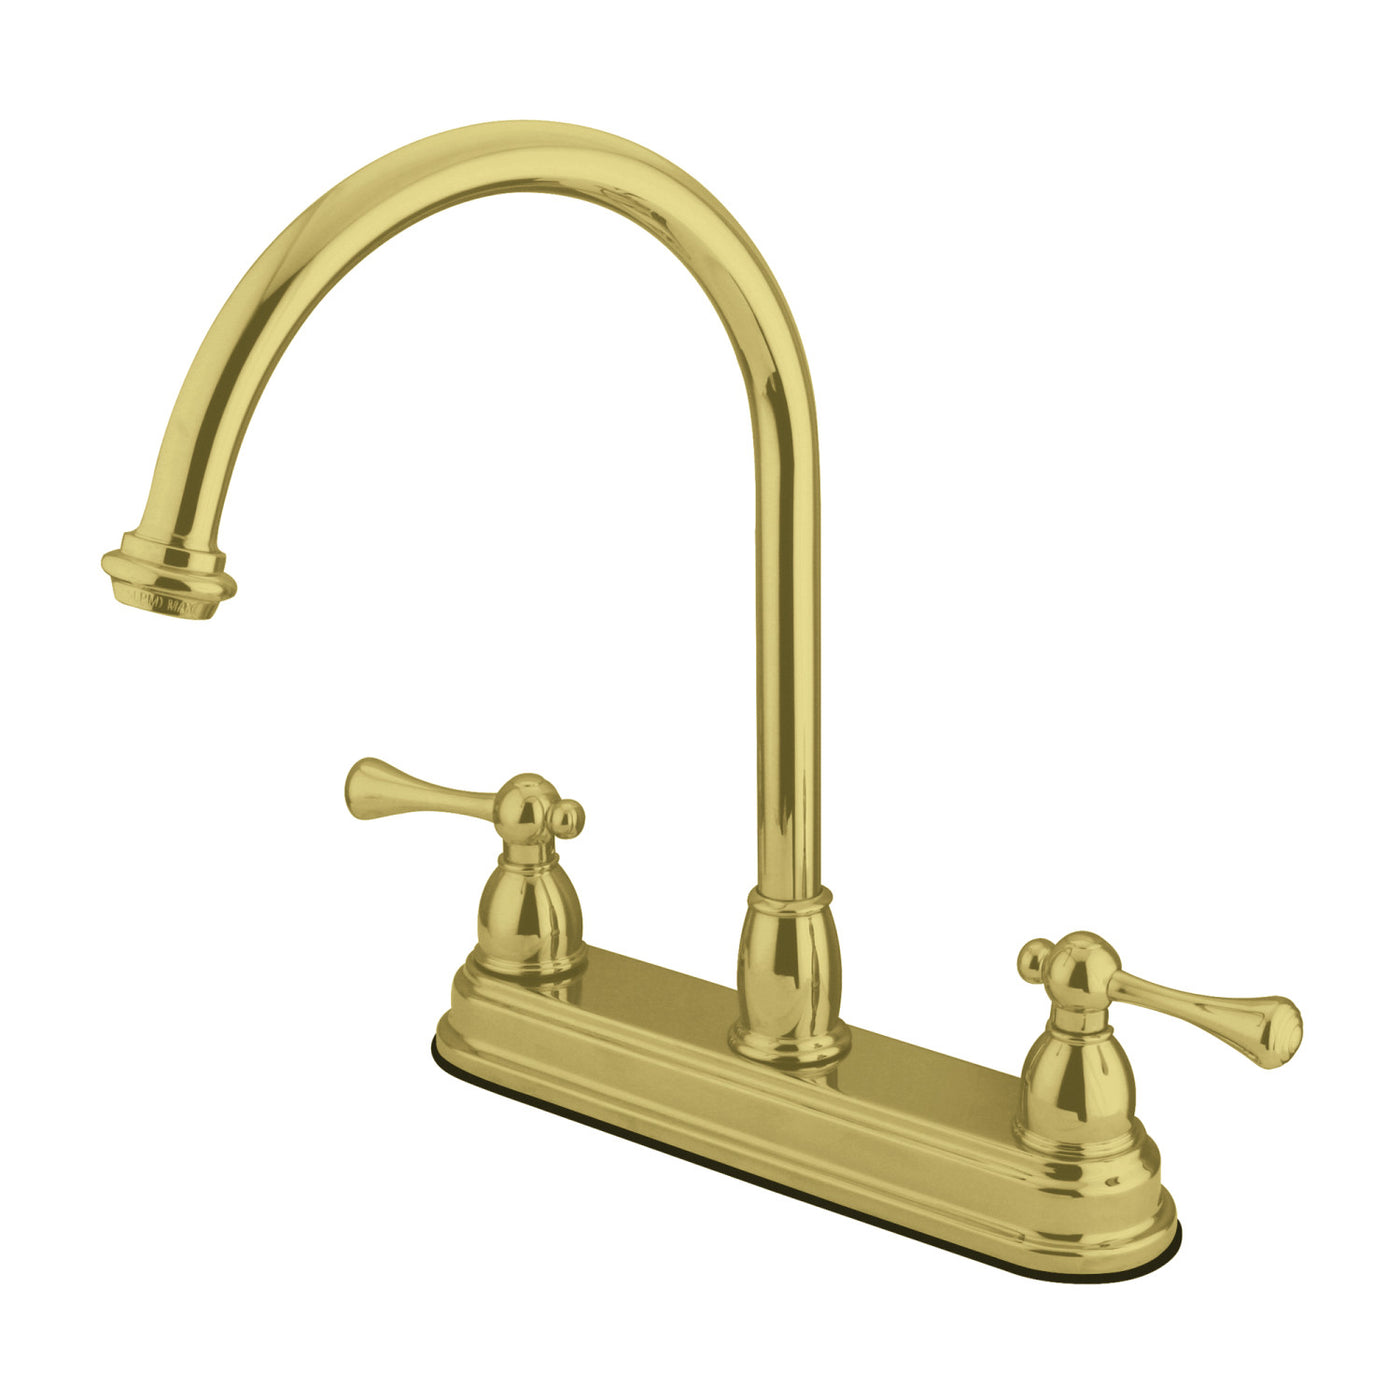 Elements of Design EB3742BL 8-Inch Centerset Kitchen Faucet, Polished Brass